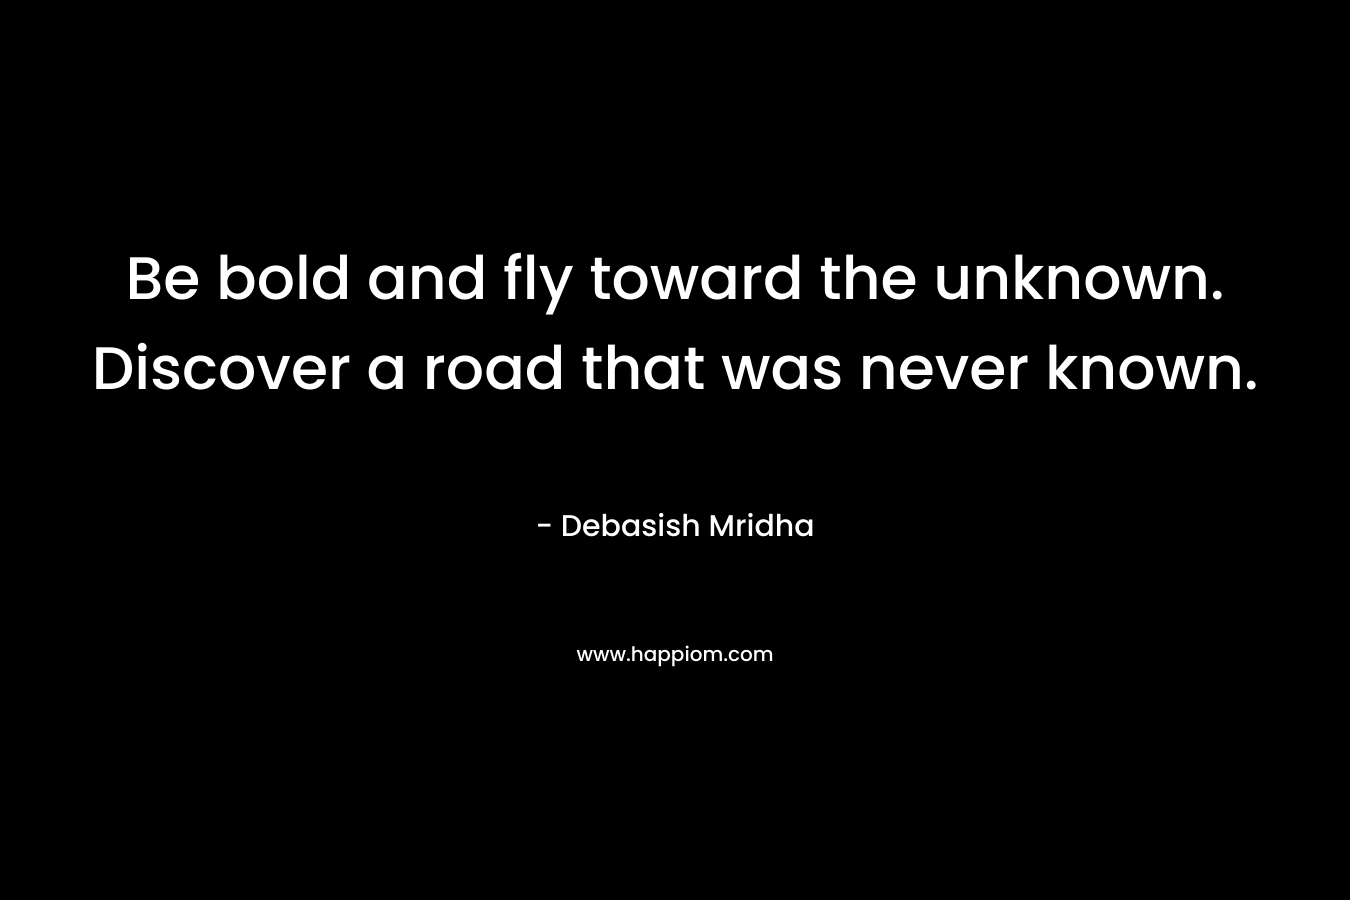 Be bold and fly toward the unknown. Discover a road that was never known.